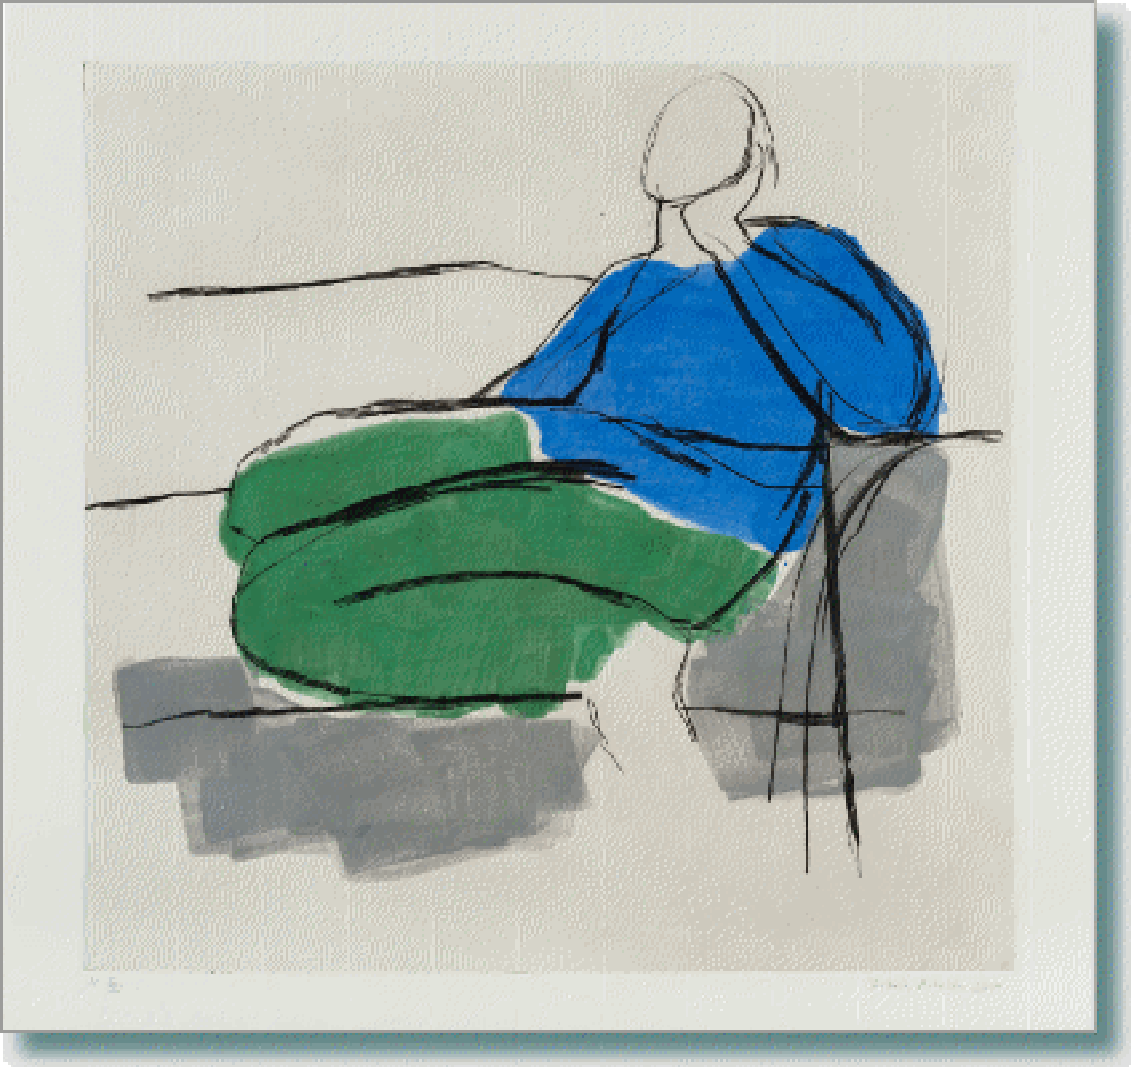 Victoria Achache - Blue and Green Sitting Figure